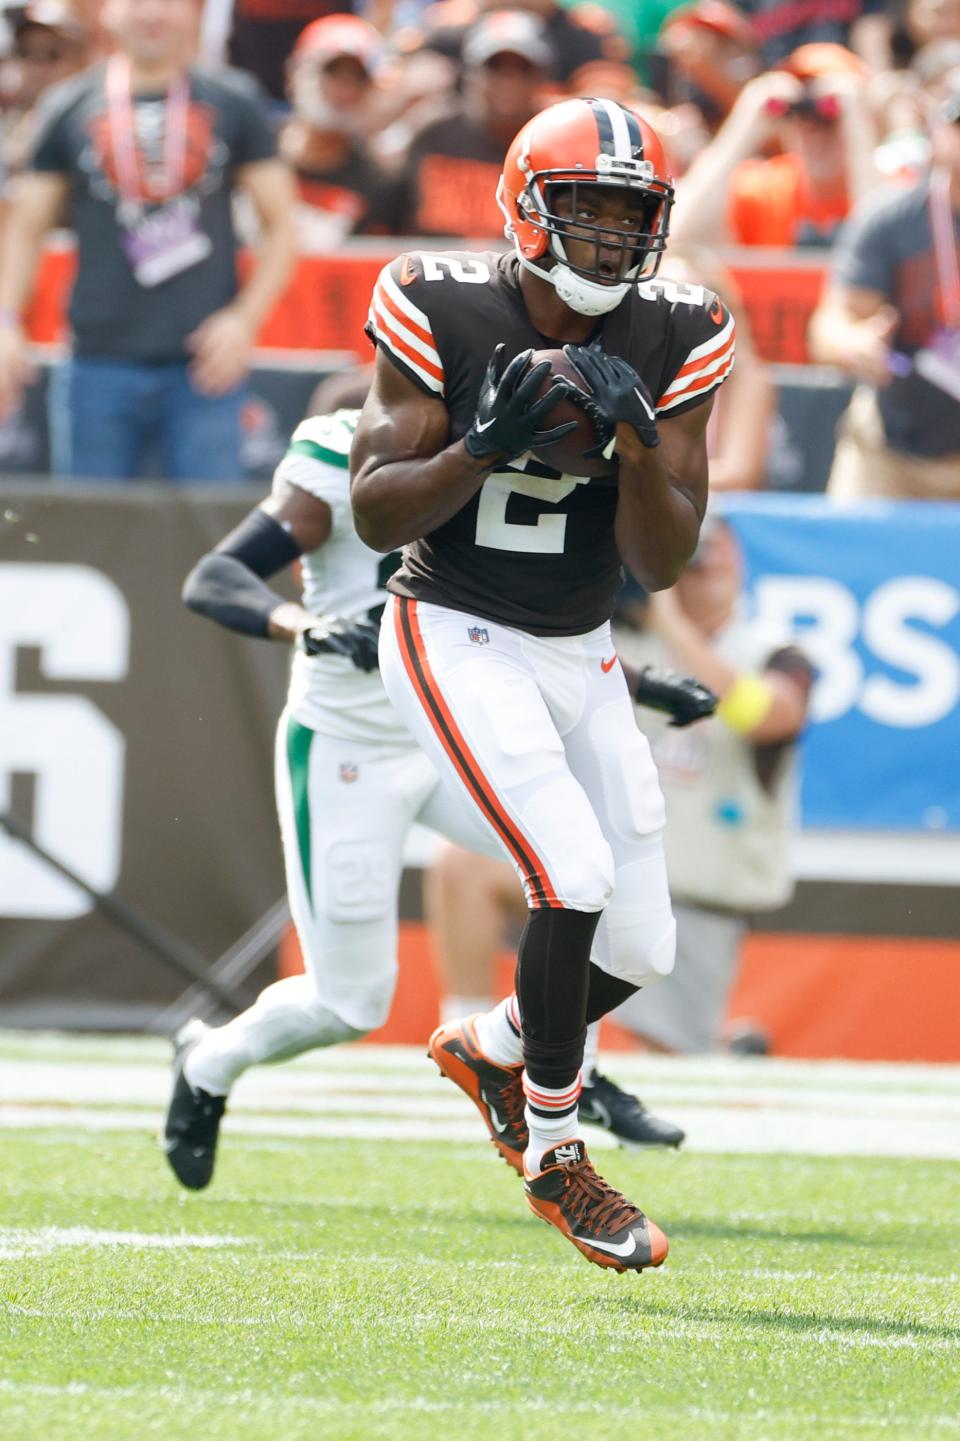 Browns wide receiver Amari Cooper makes a catch and takes it in for a touchdown against the New York Jets during the first half, Sunday, Sept. 18, 2022, in Cleveland.